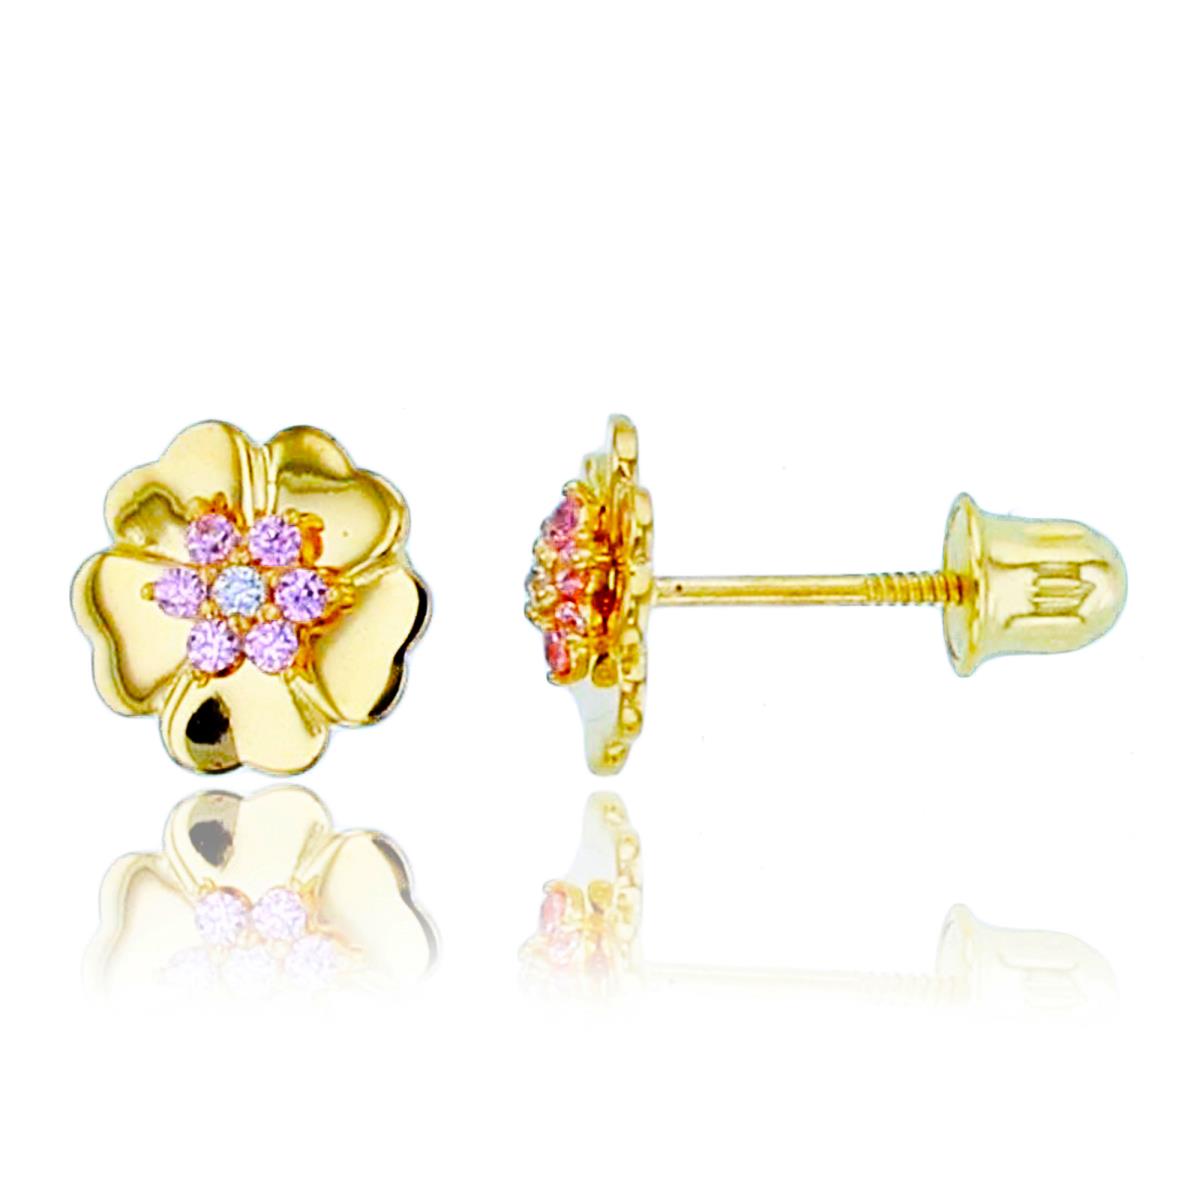 14K Yellow Gold 7x7mm Polished & White/Pink CZ Flower Stud Earring